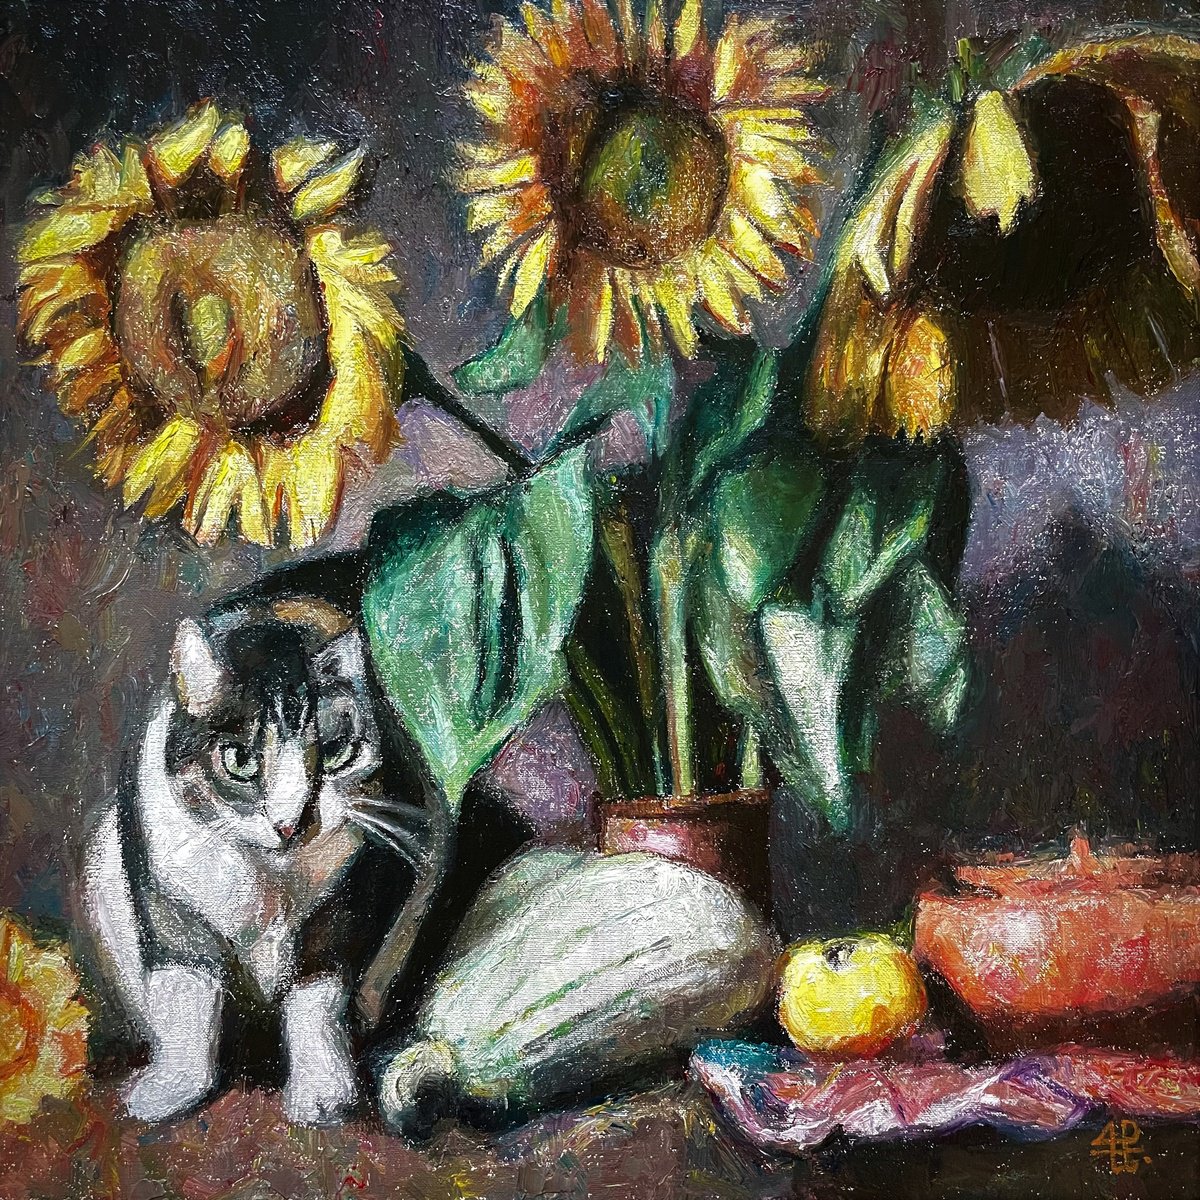 Farm cat with sunflowers by Andres Portillo